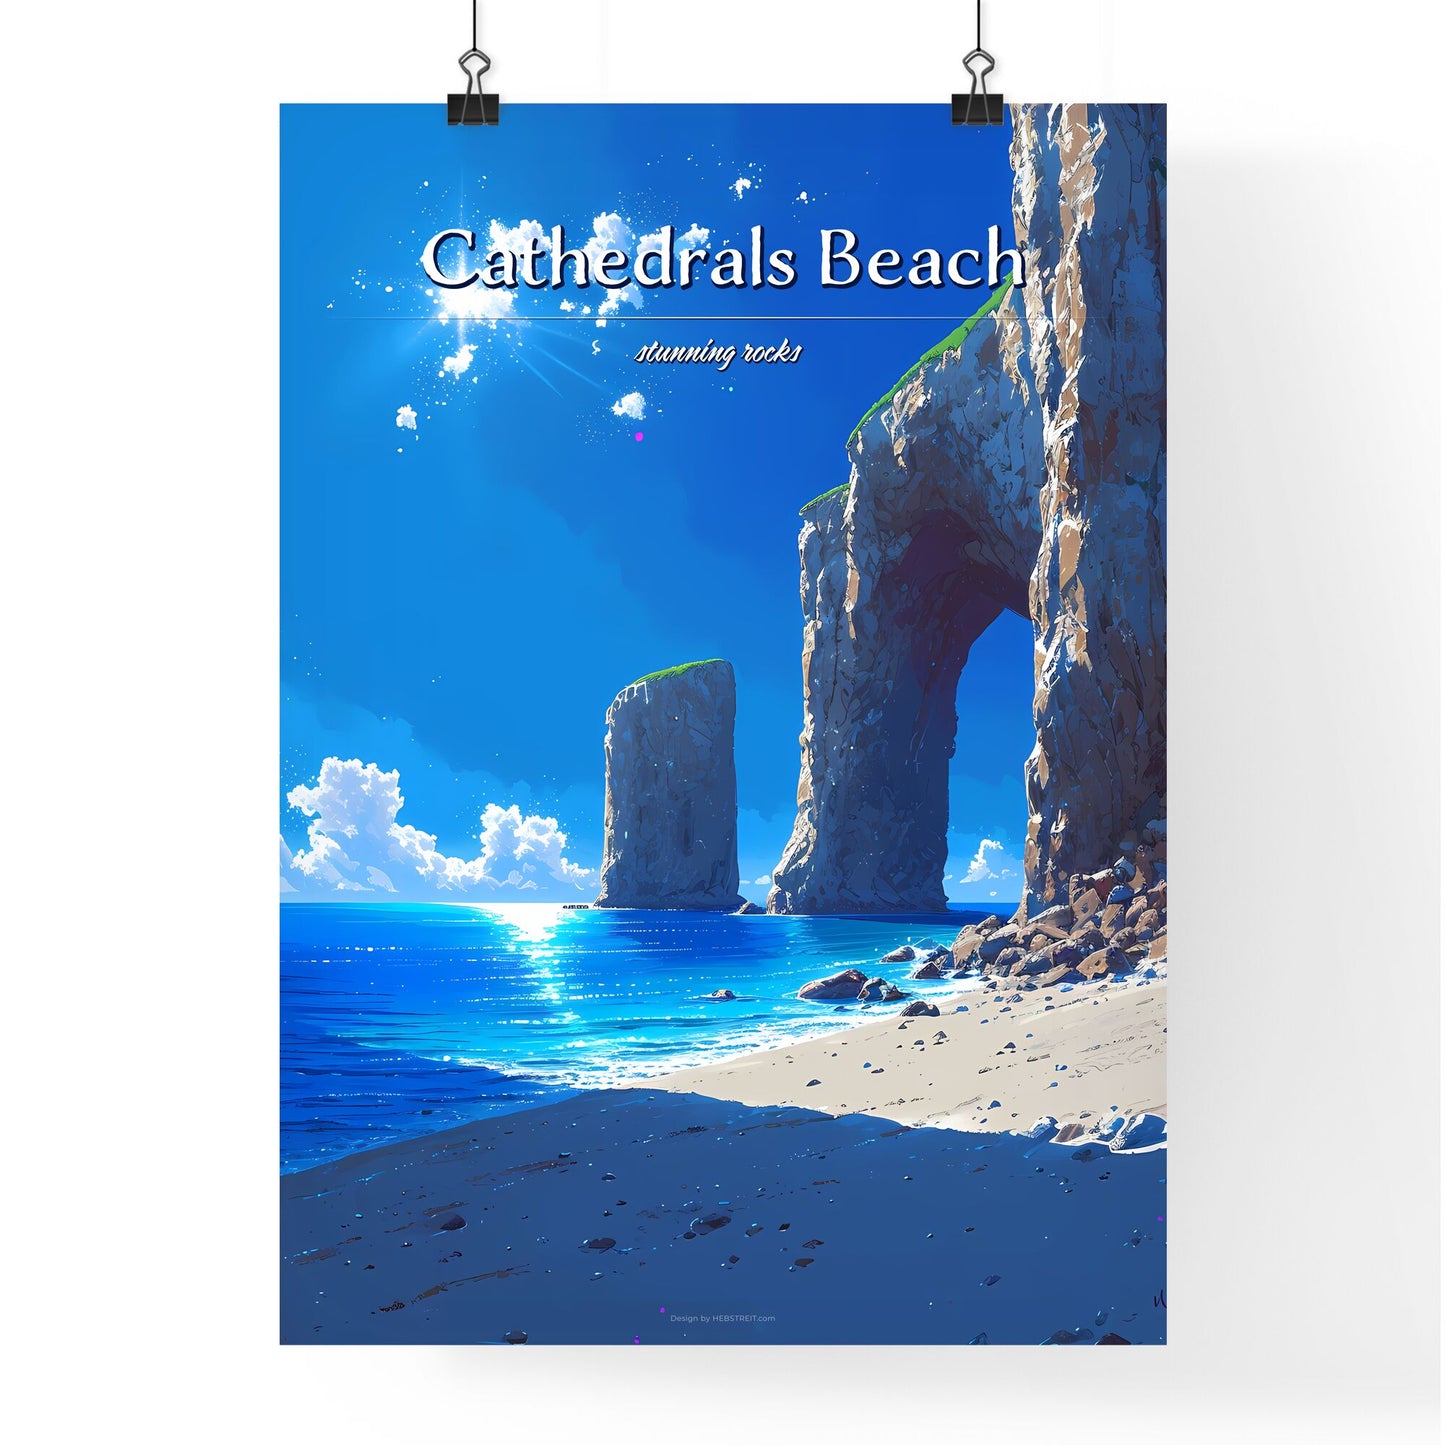 Cathedrals Beach - Art print of a beach with rocks and a large arch Default Title